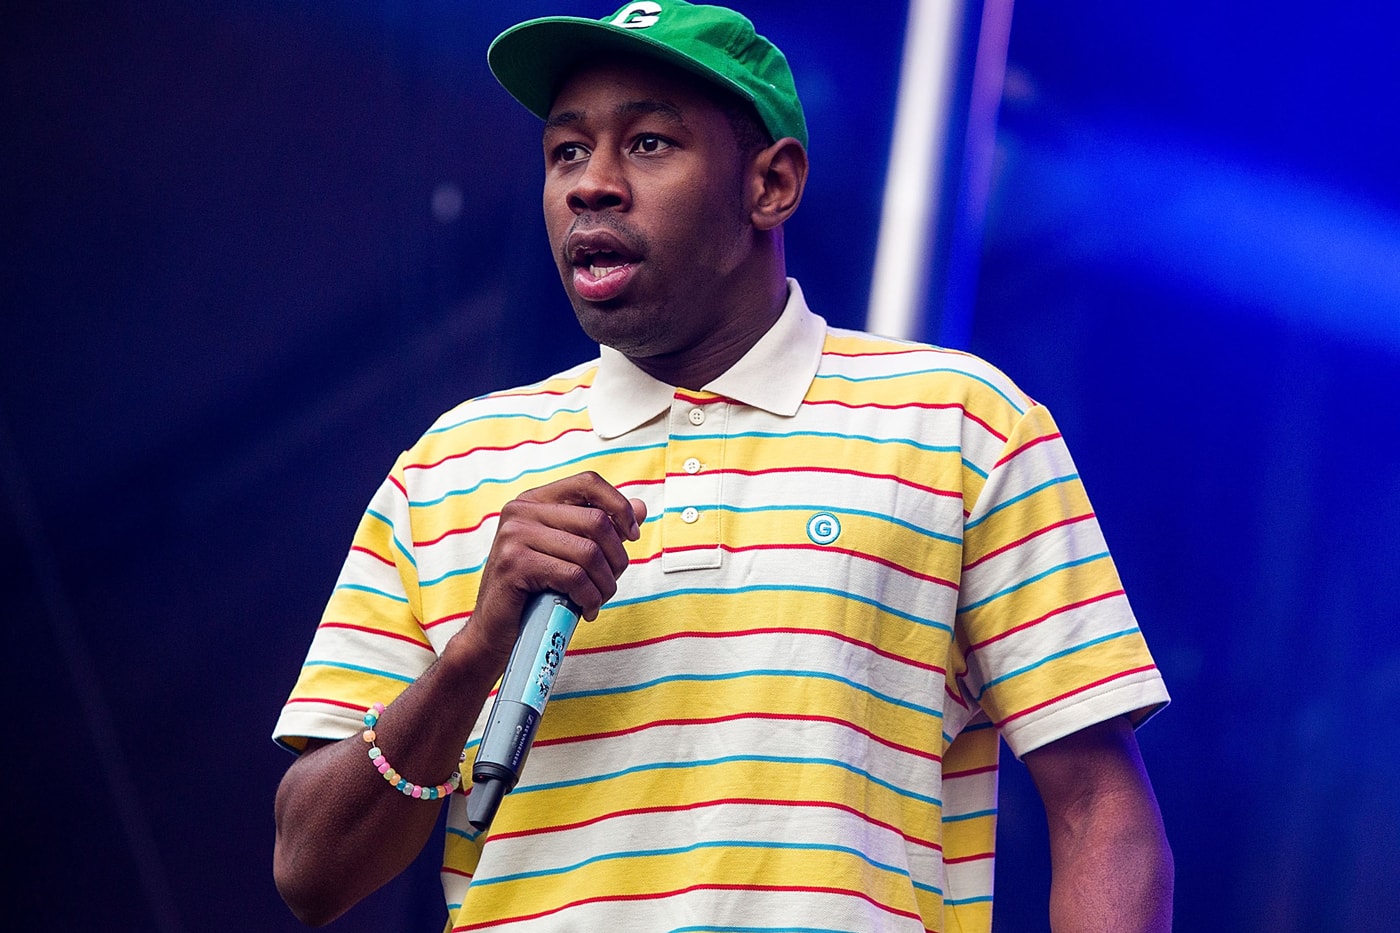 tyler-the-creator-enemy-theresa-may-new-prime-minister-britain